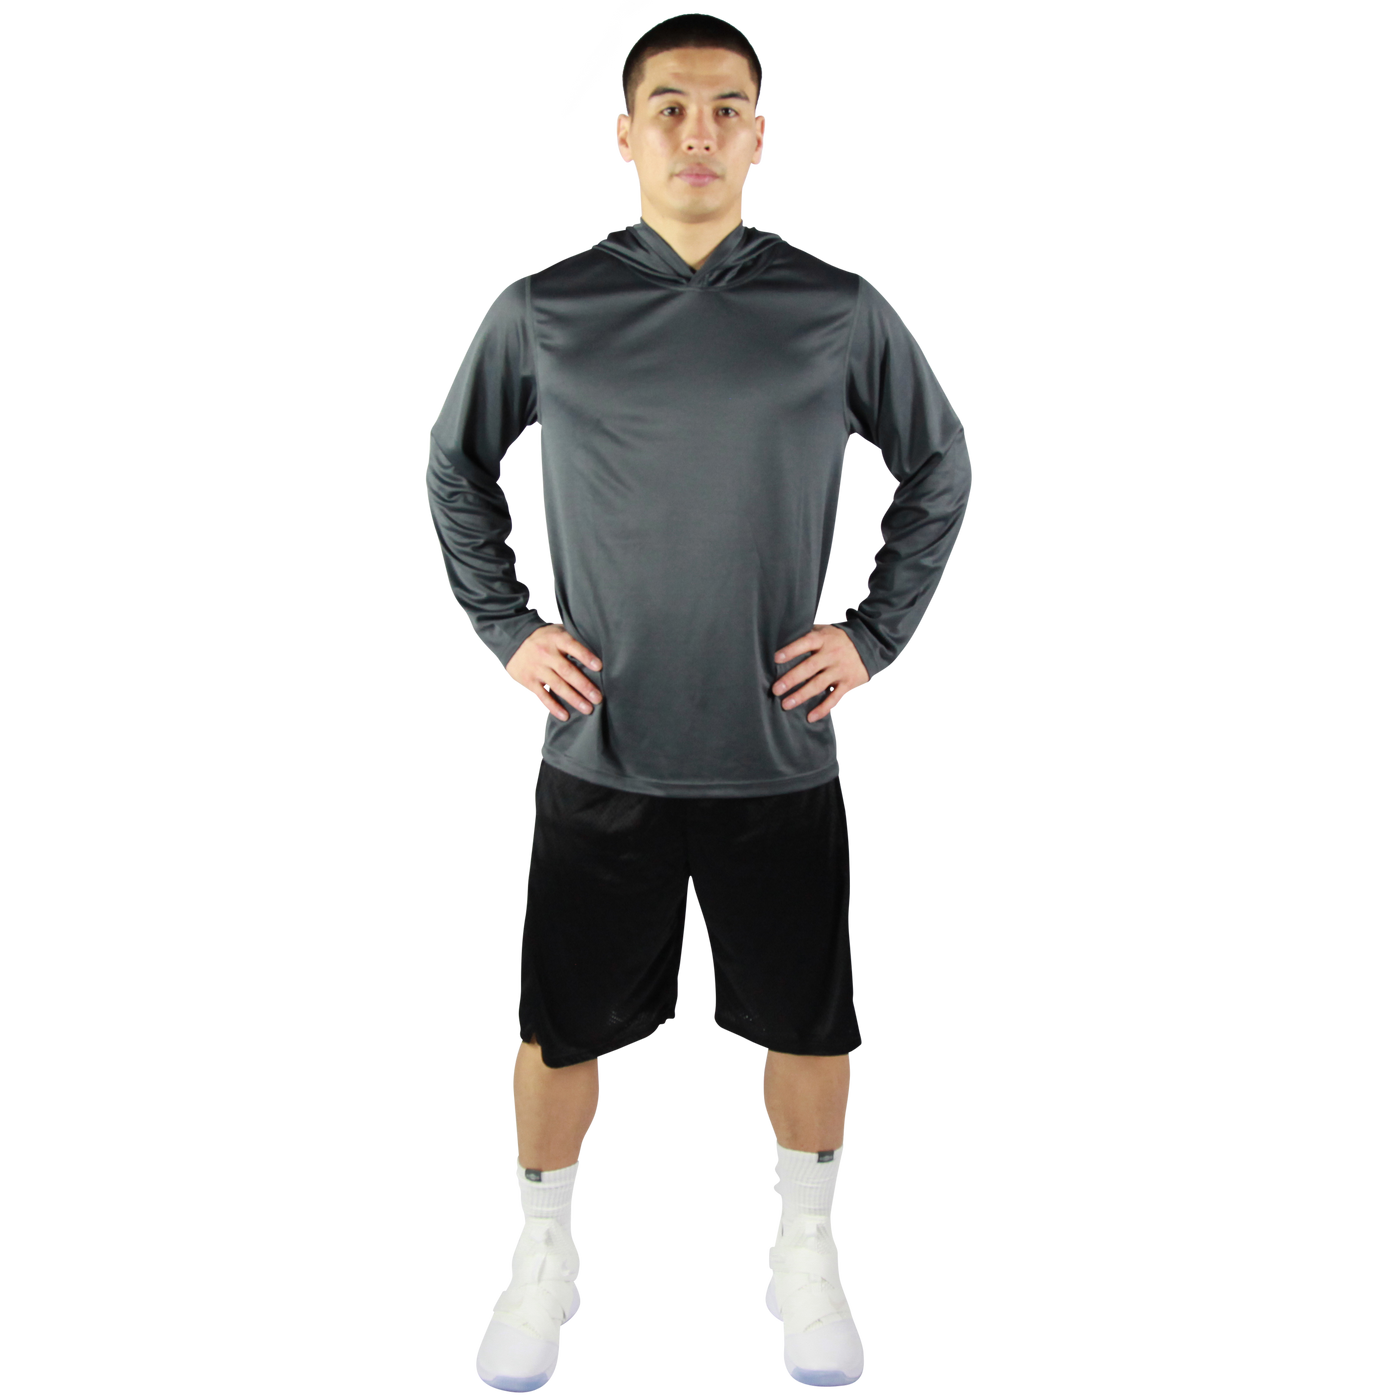 Shirts & Skins Graphite Deluxe Hooded Training Shirt